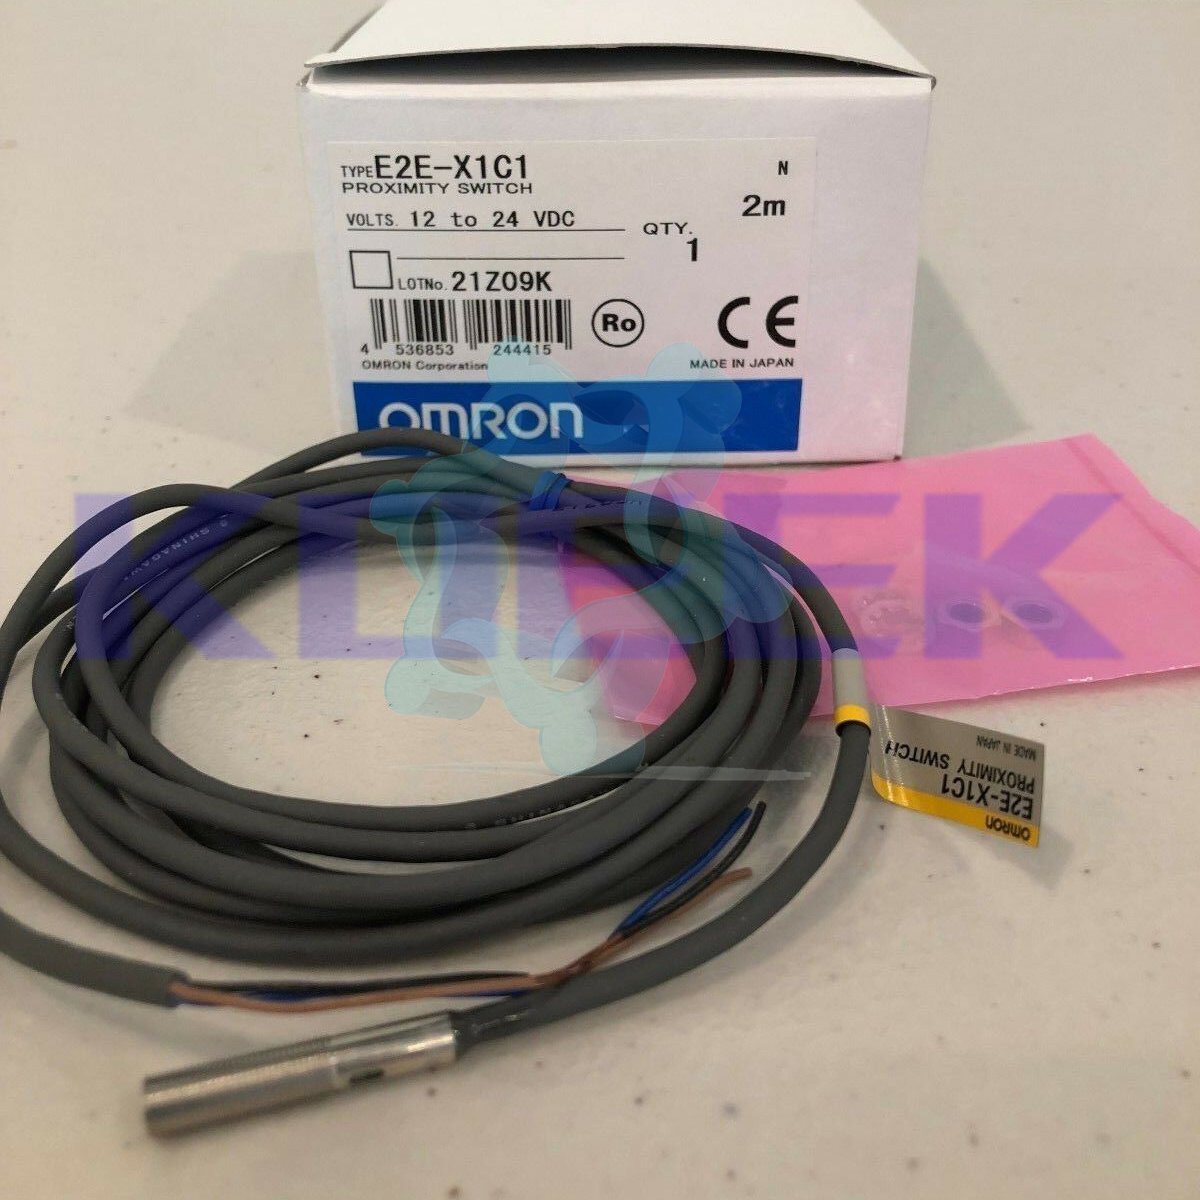 E2E-X1C1 KOEED 1, 80%, import_2020_10_10_031751, Omron, Other